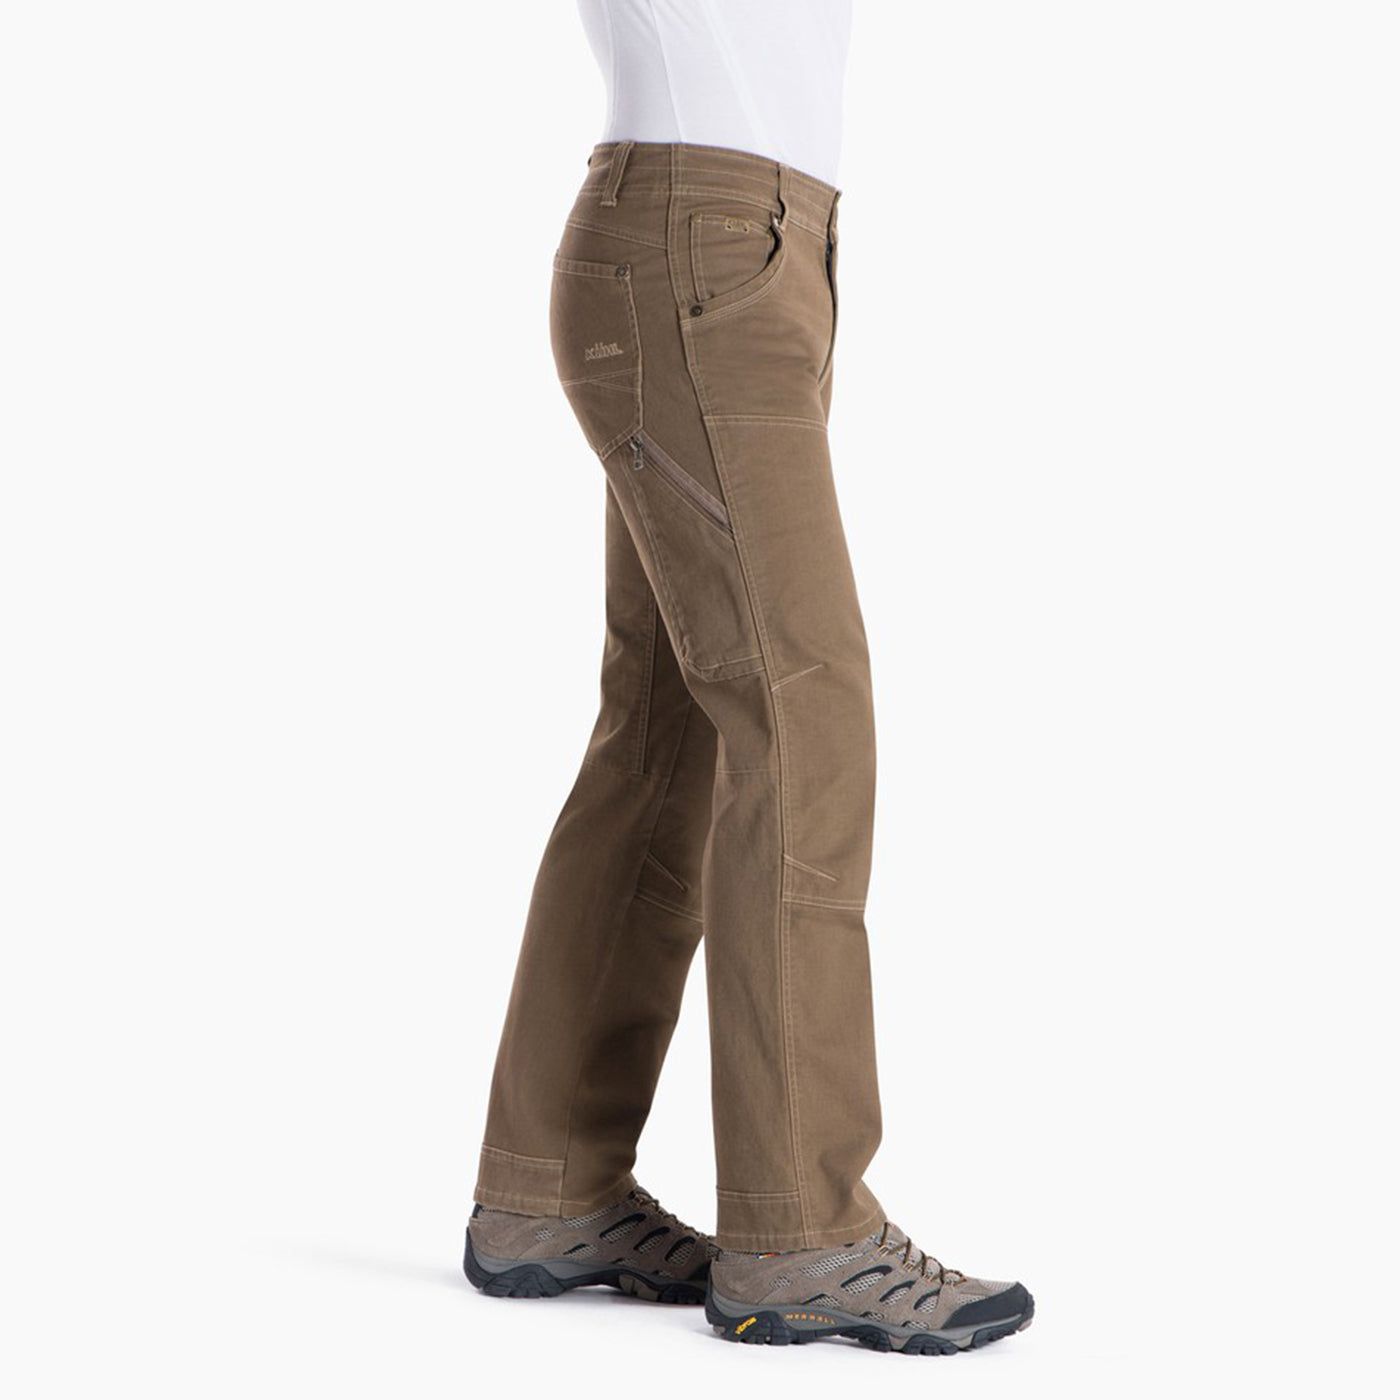 kuhl the law pants mens on model side view in color light brown khaki